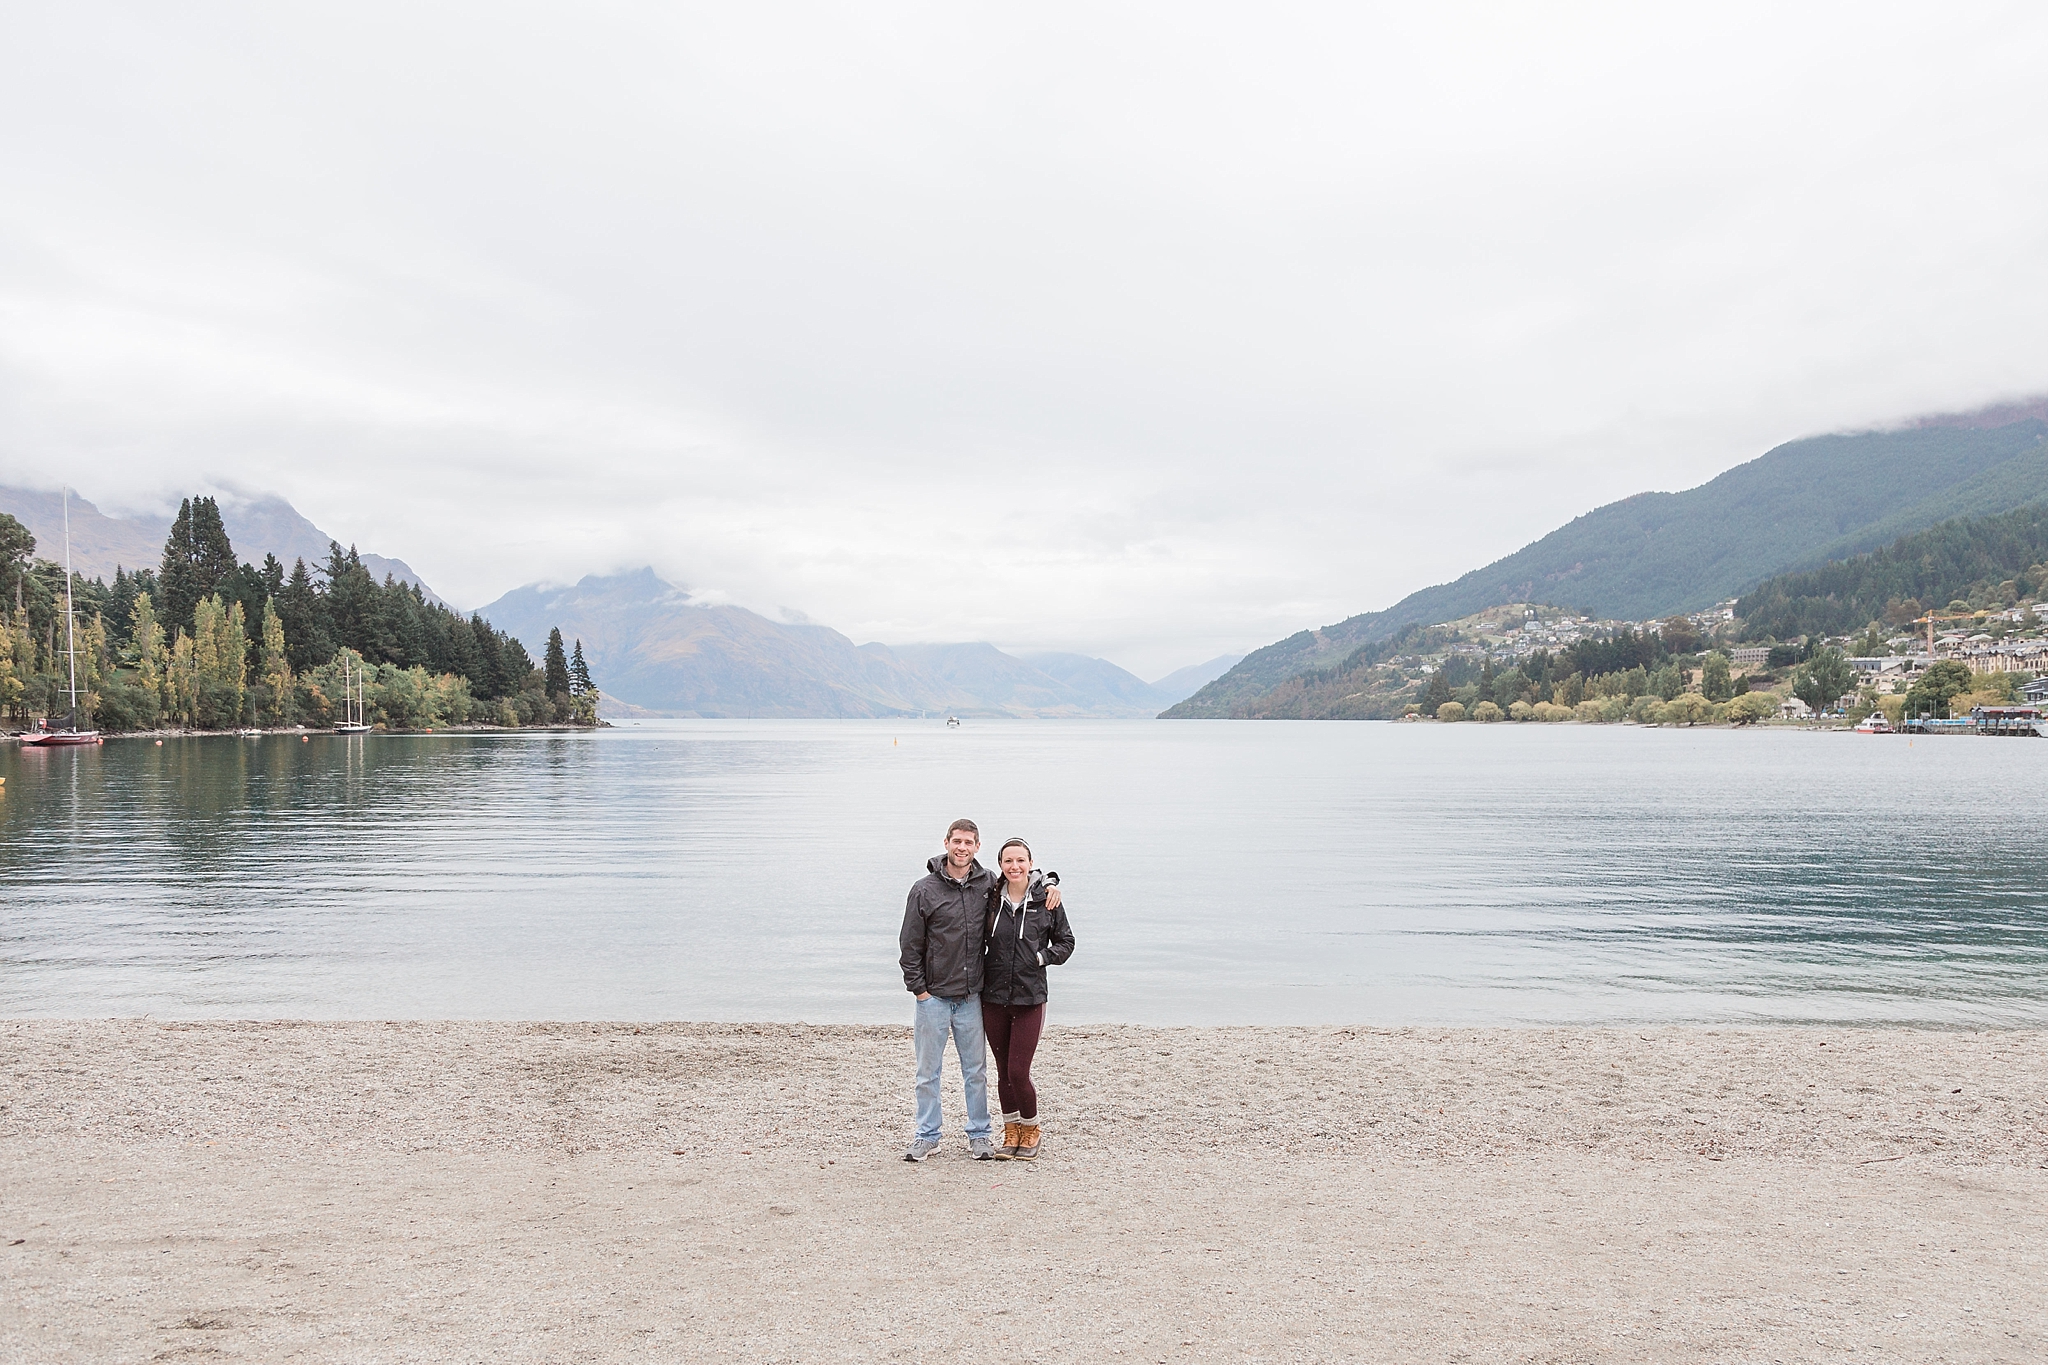 This wedding photographer flees Washington DC's cold winter to experience a unique vacation to New Zealand's South Island!